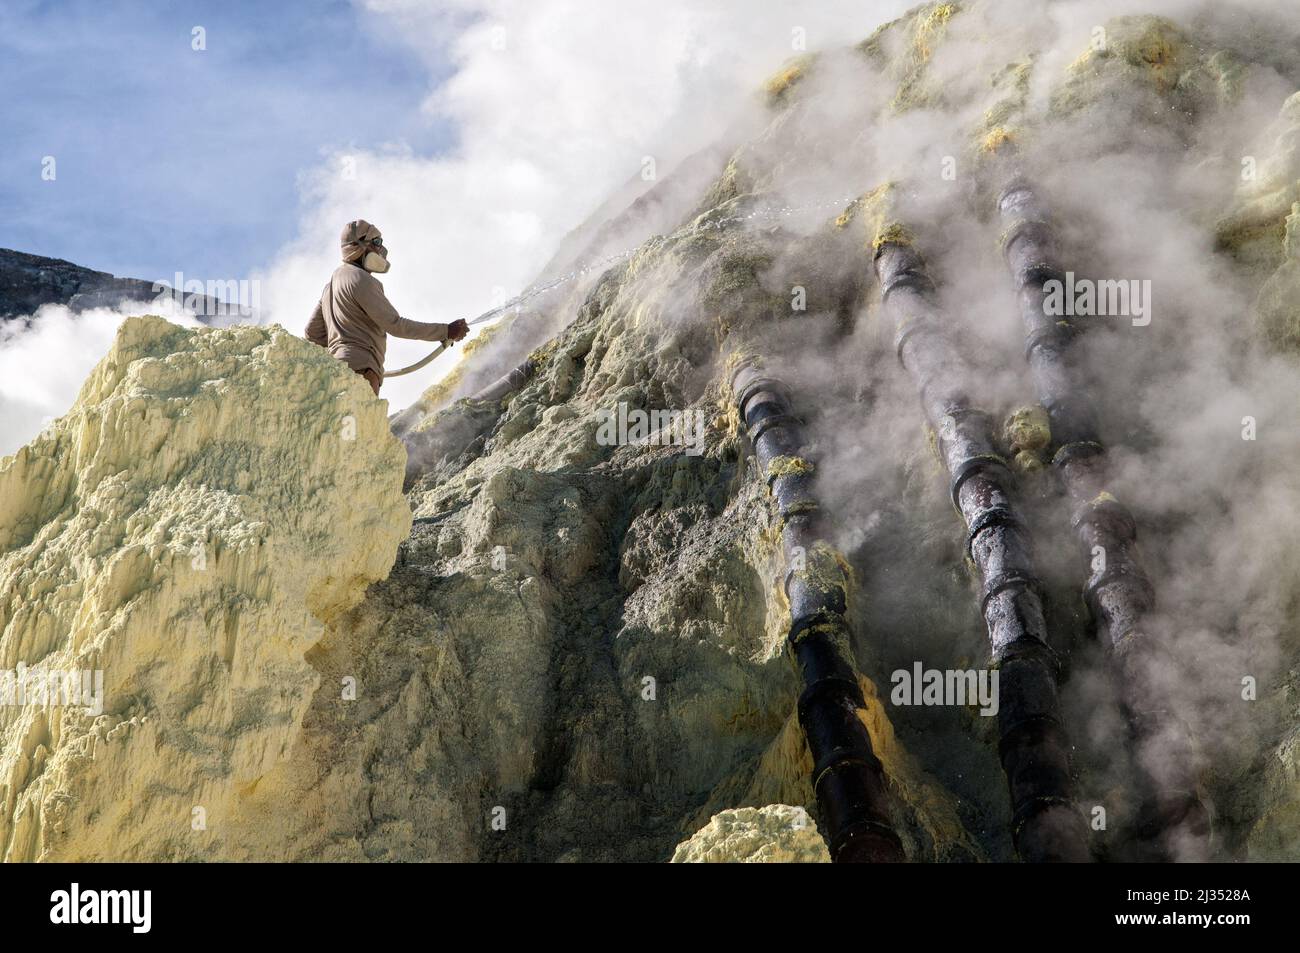 Miner cooling pipes by spraying water on them inside the crater of Ijen volcano, Java island, Indonesia Stock Photo